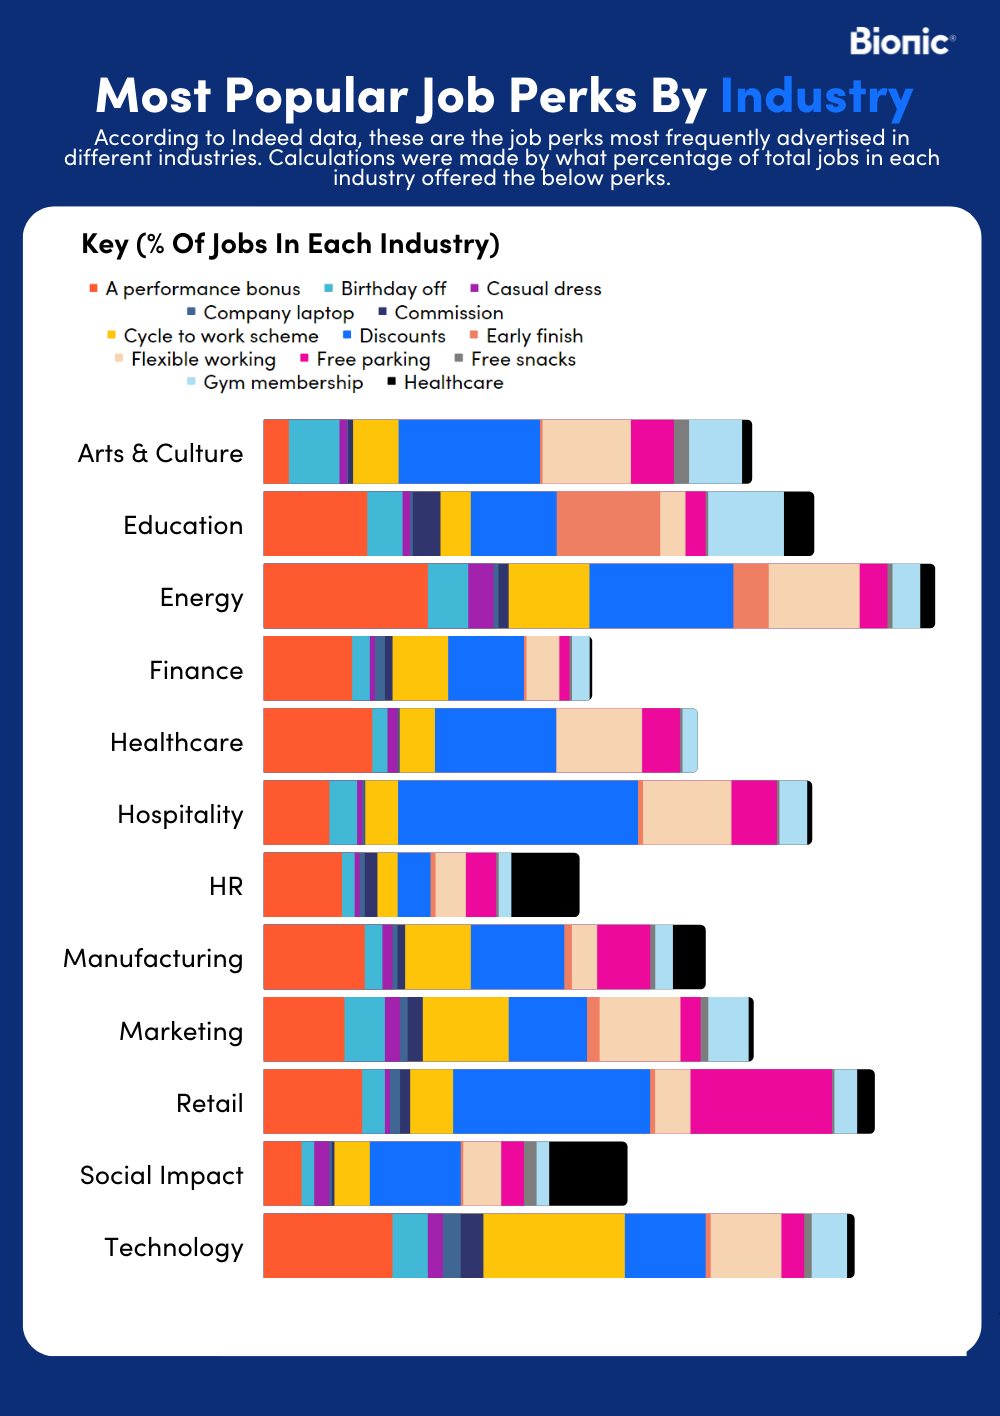 Bar graph showing the most popular job perks by industry